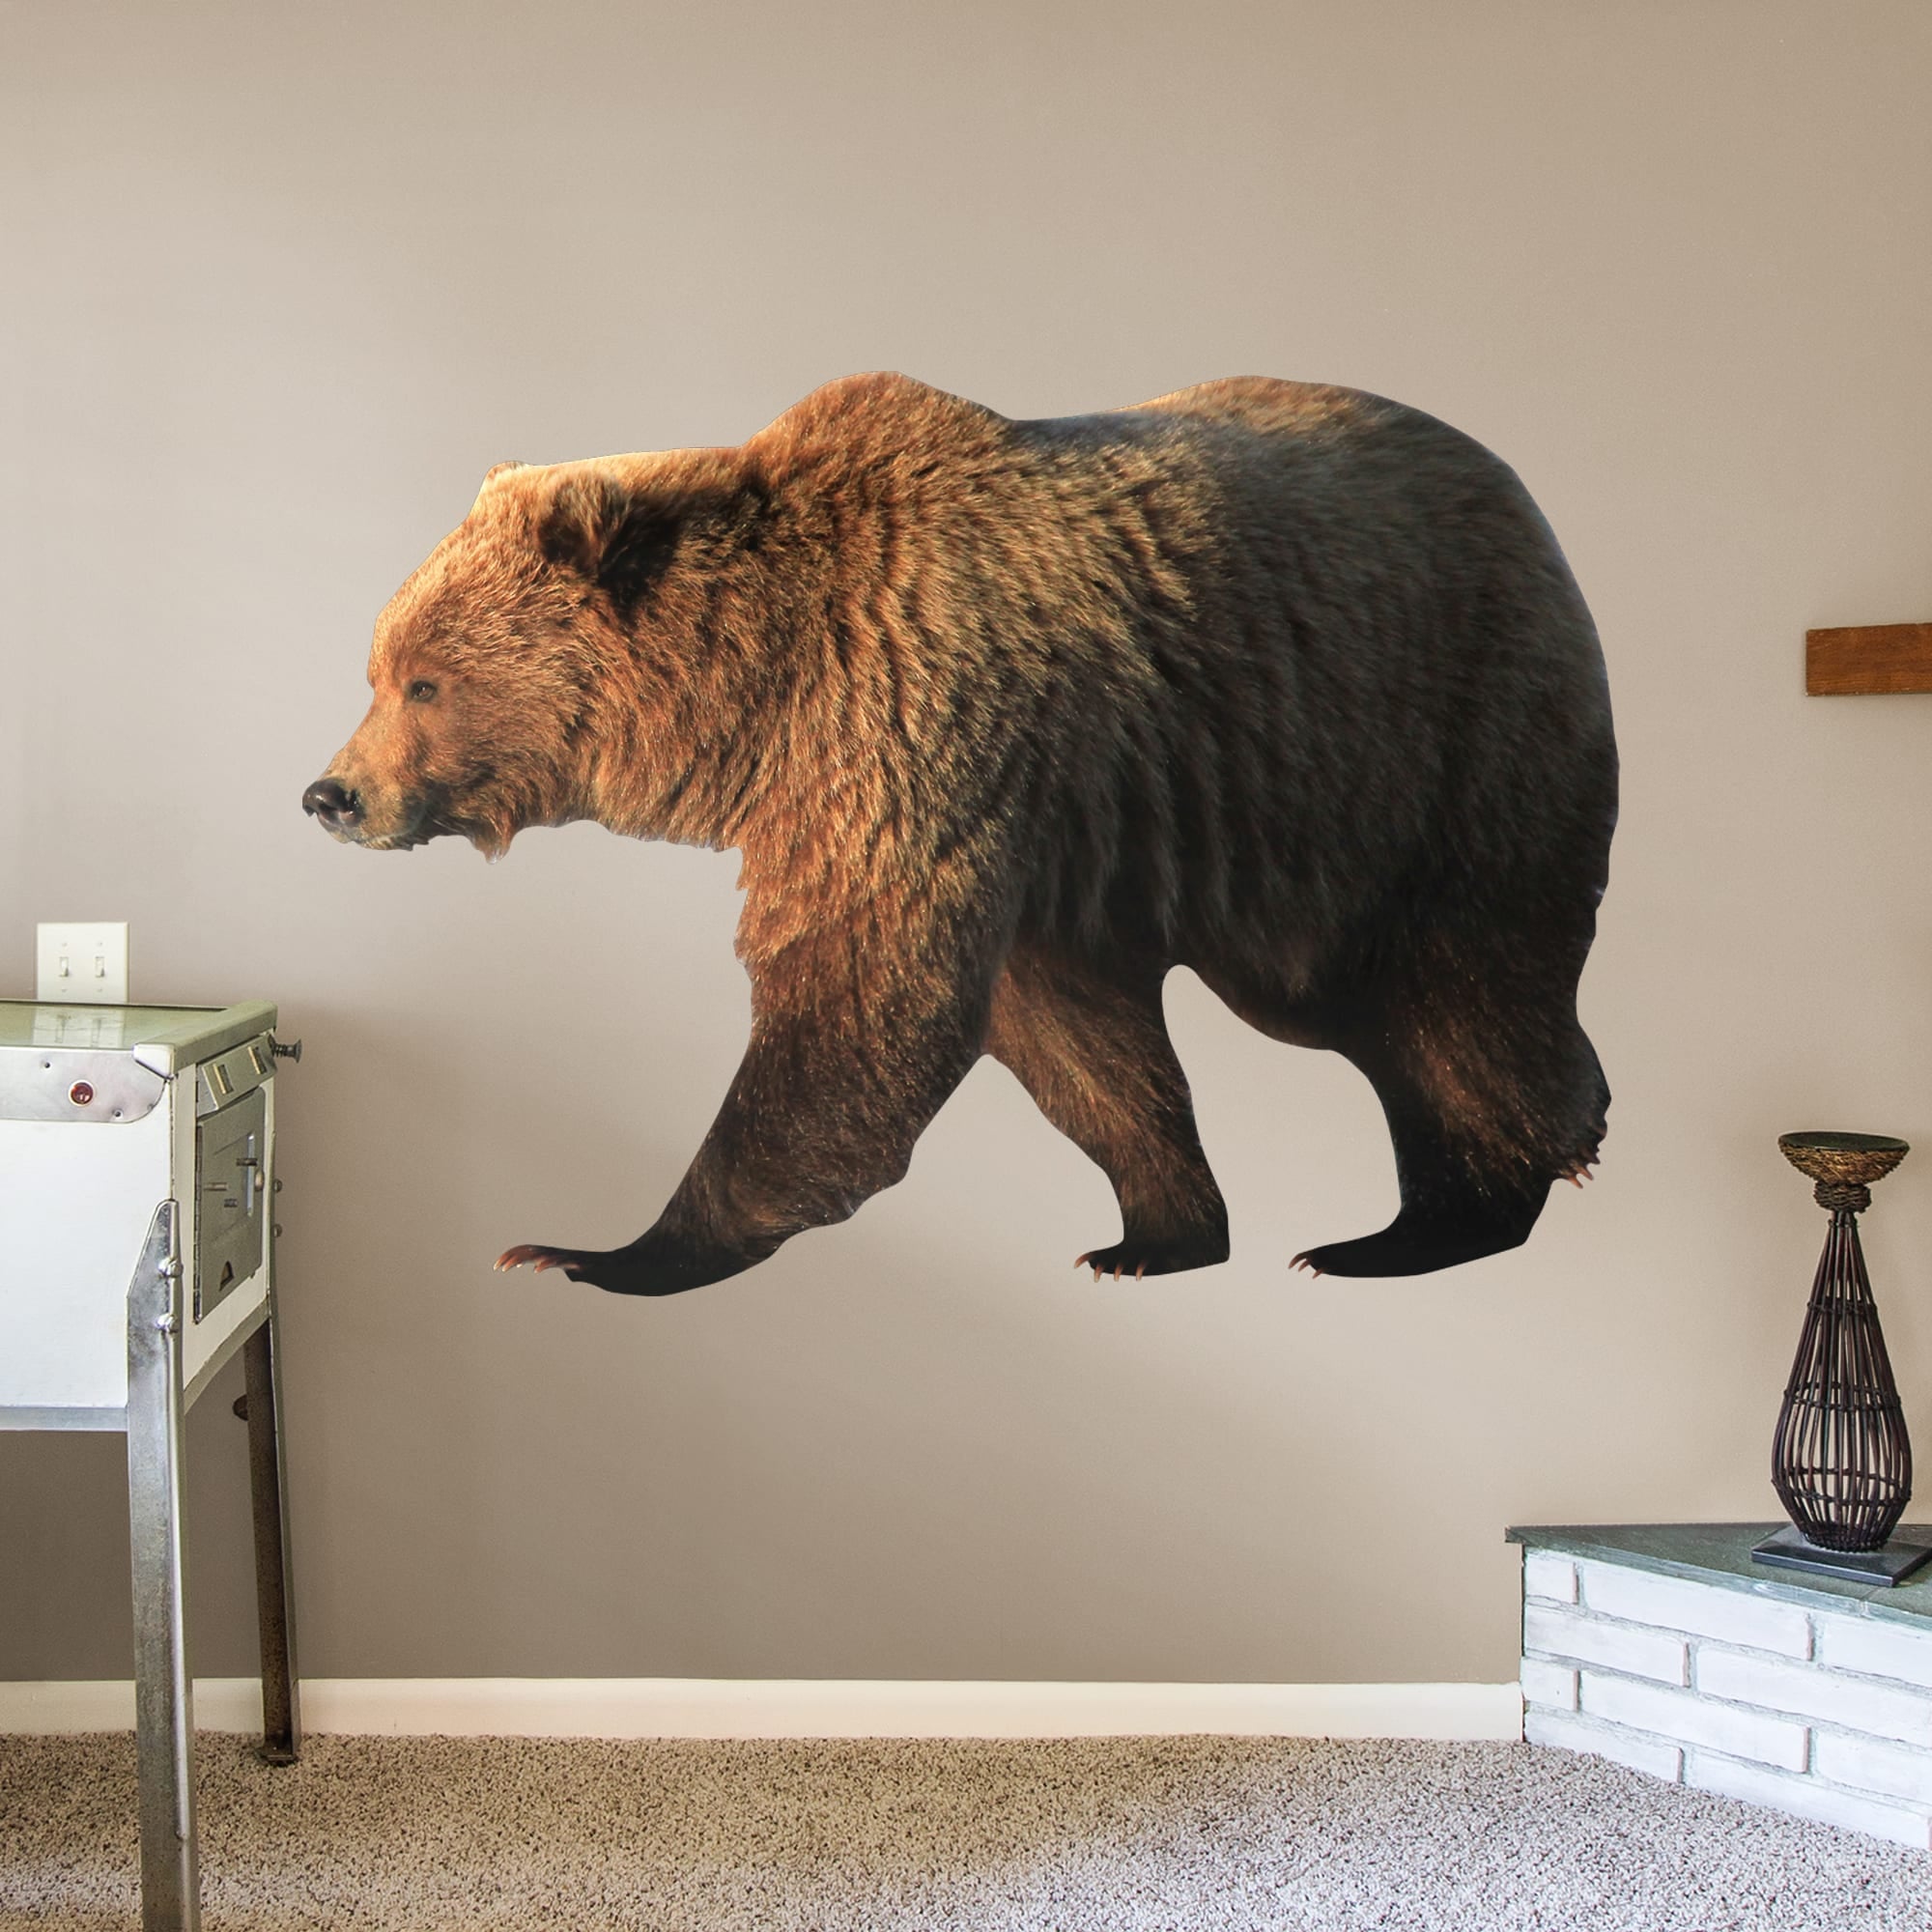 Grizzly Bear - Removable Vinyl Decal Life-Size Animal + 2 Decals (73"W x 51"H) by Fathead